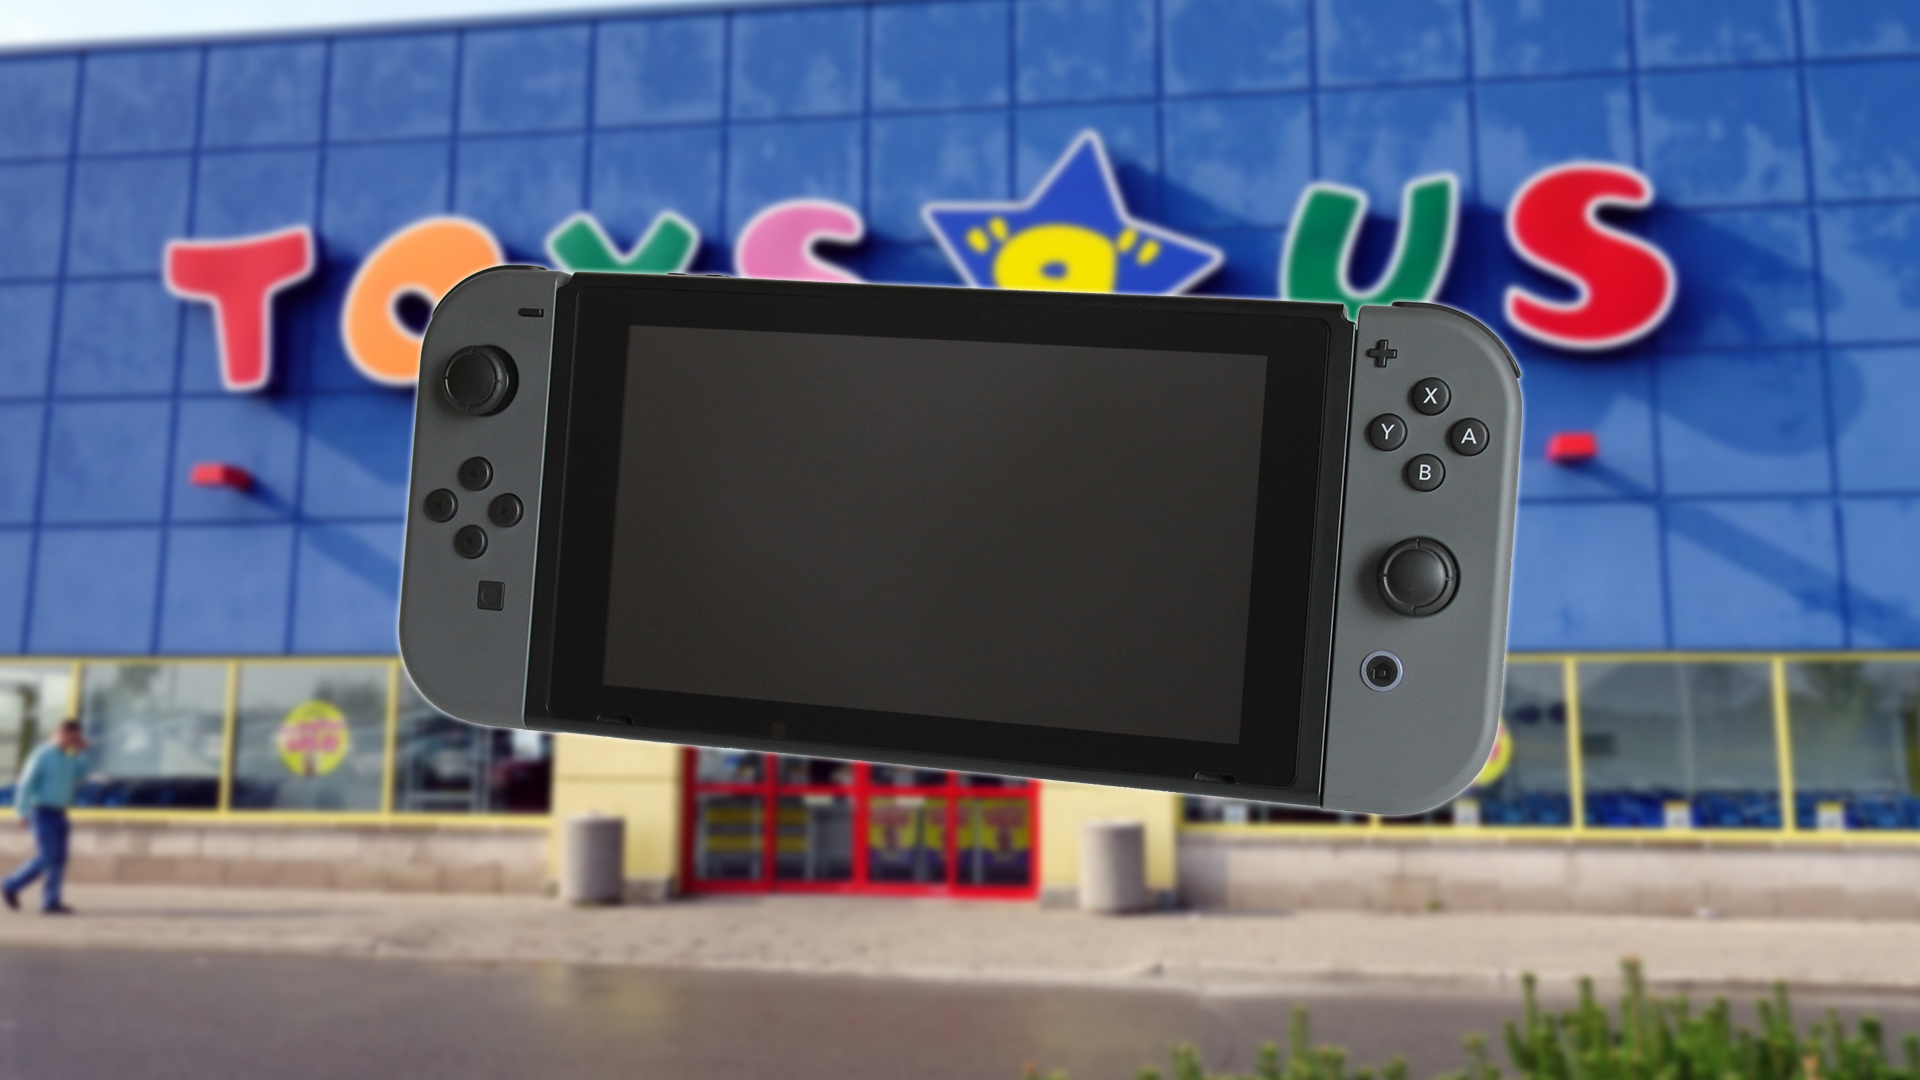 Toys"R"Us stores restocking the Nintendo Switch this Sunday | Nintendo Wire